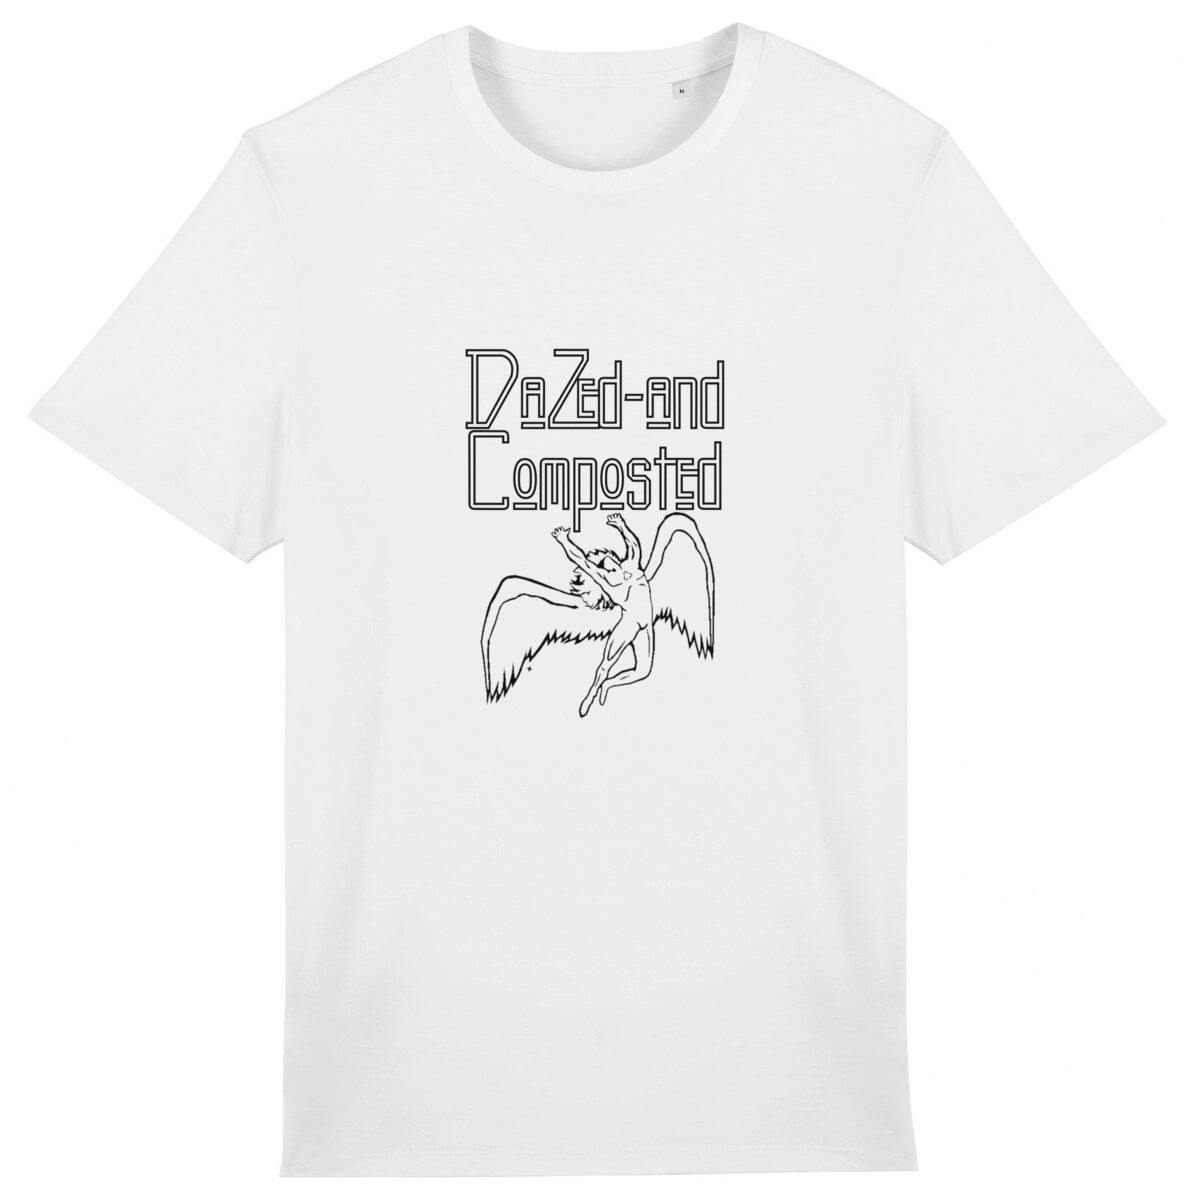 Dazed and Composted Unisex Organic Tee-1